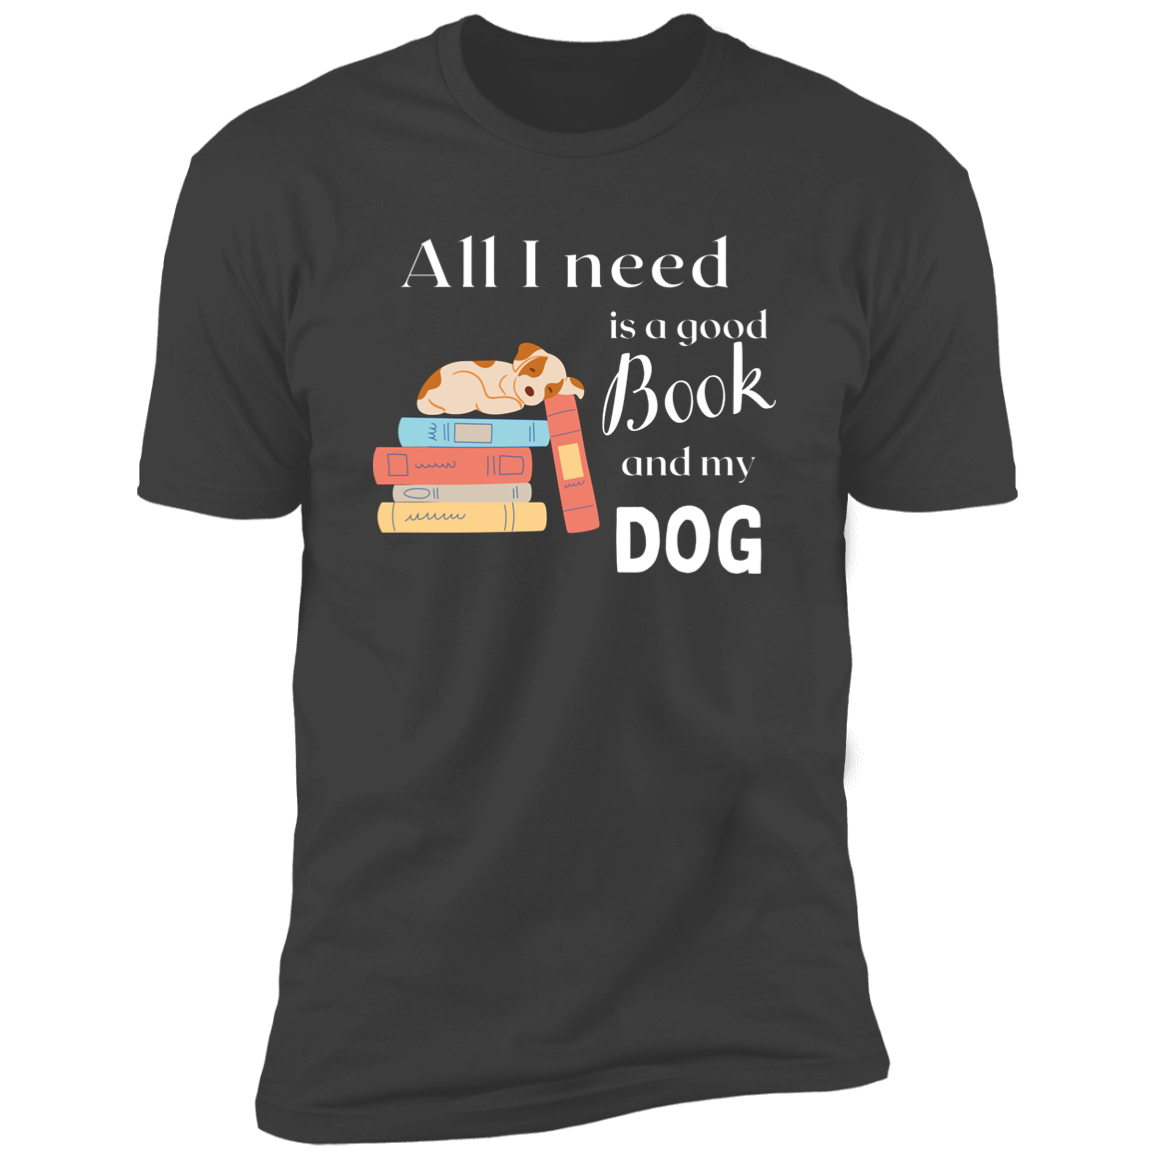 All I Need is a Good Book and My Dog, dog t-shirt for humans, in heavy metal gray